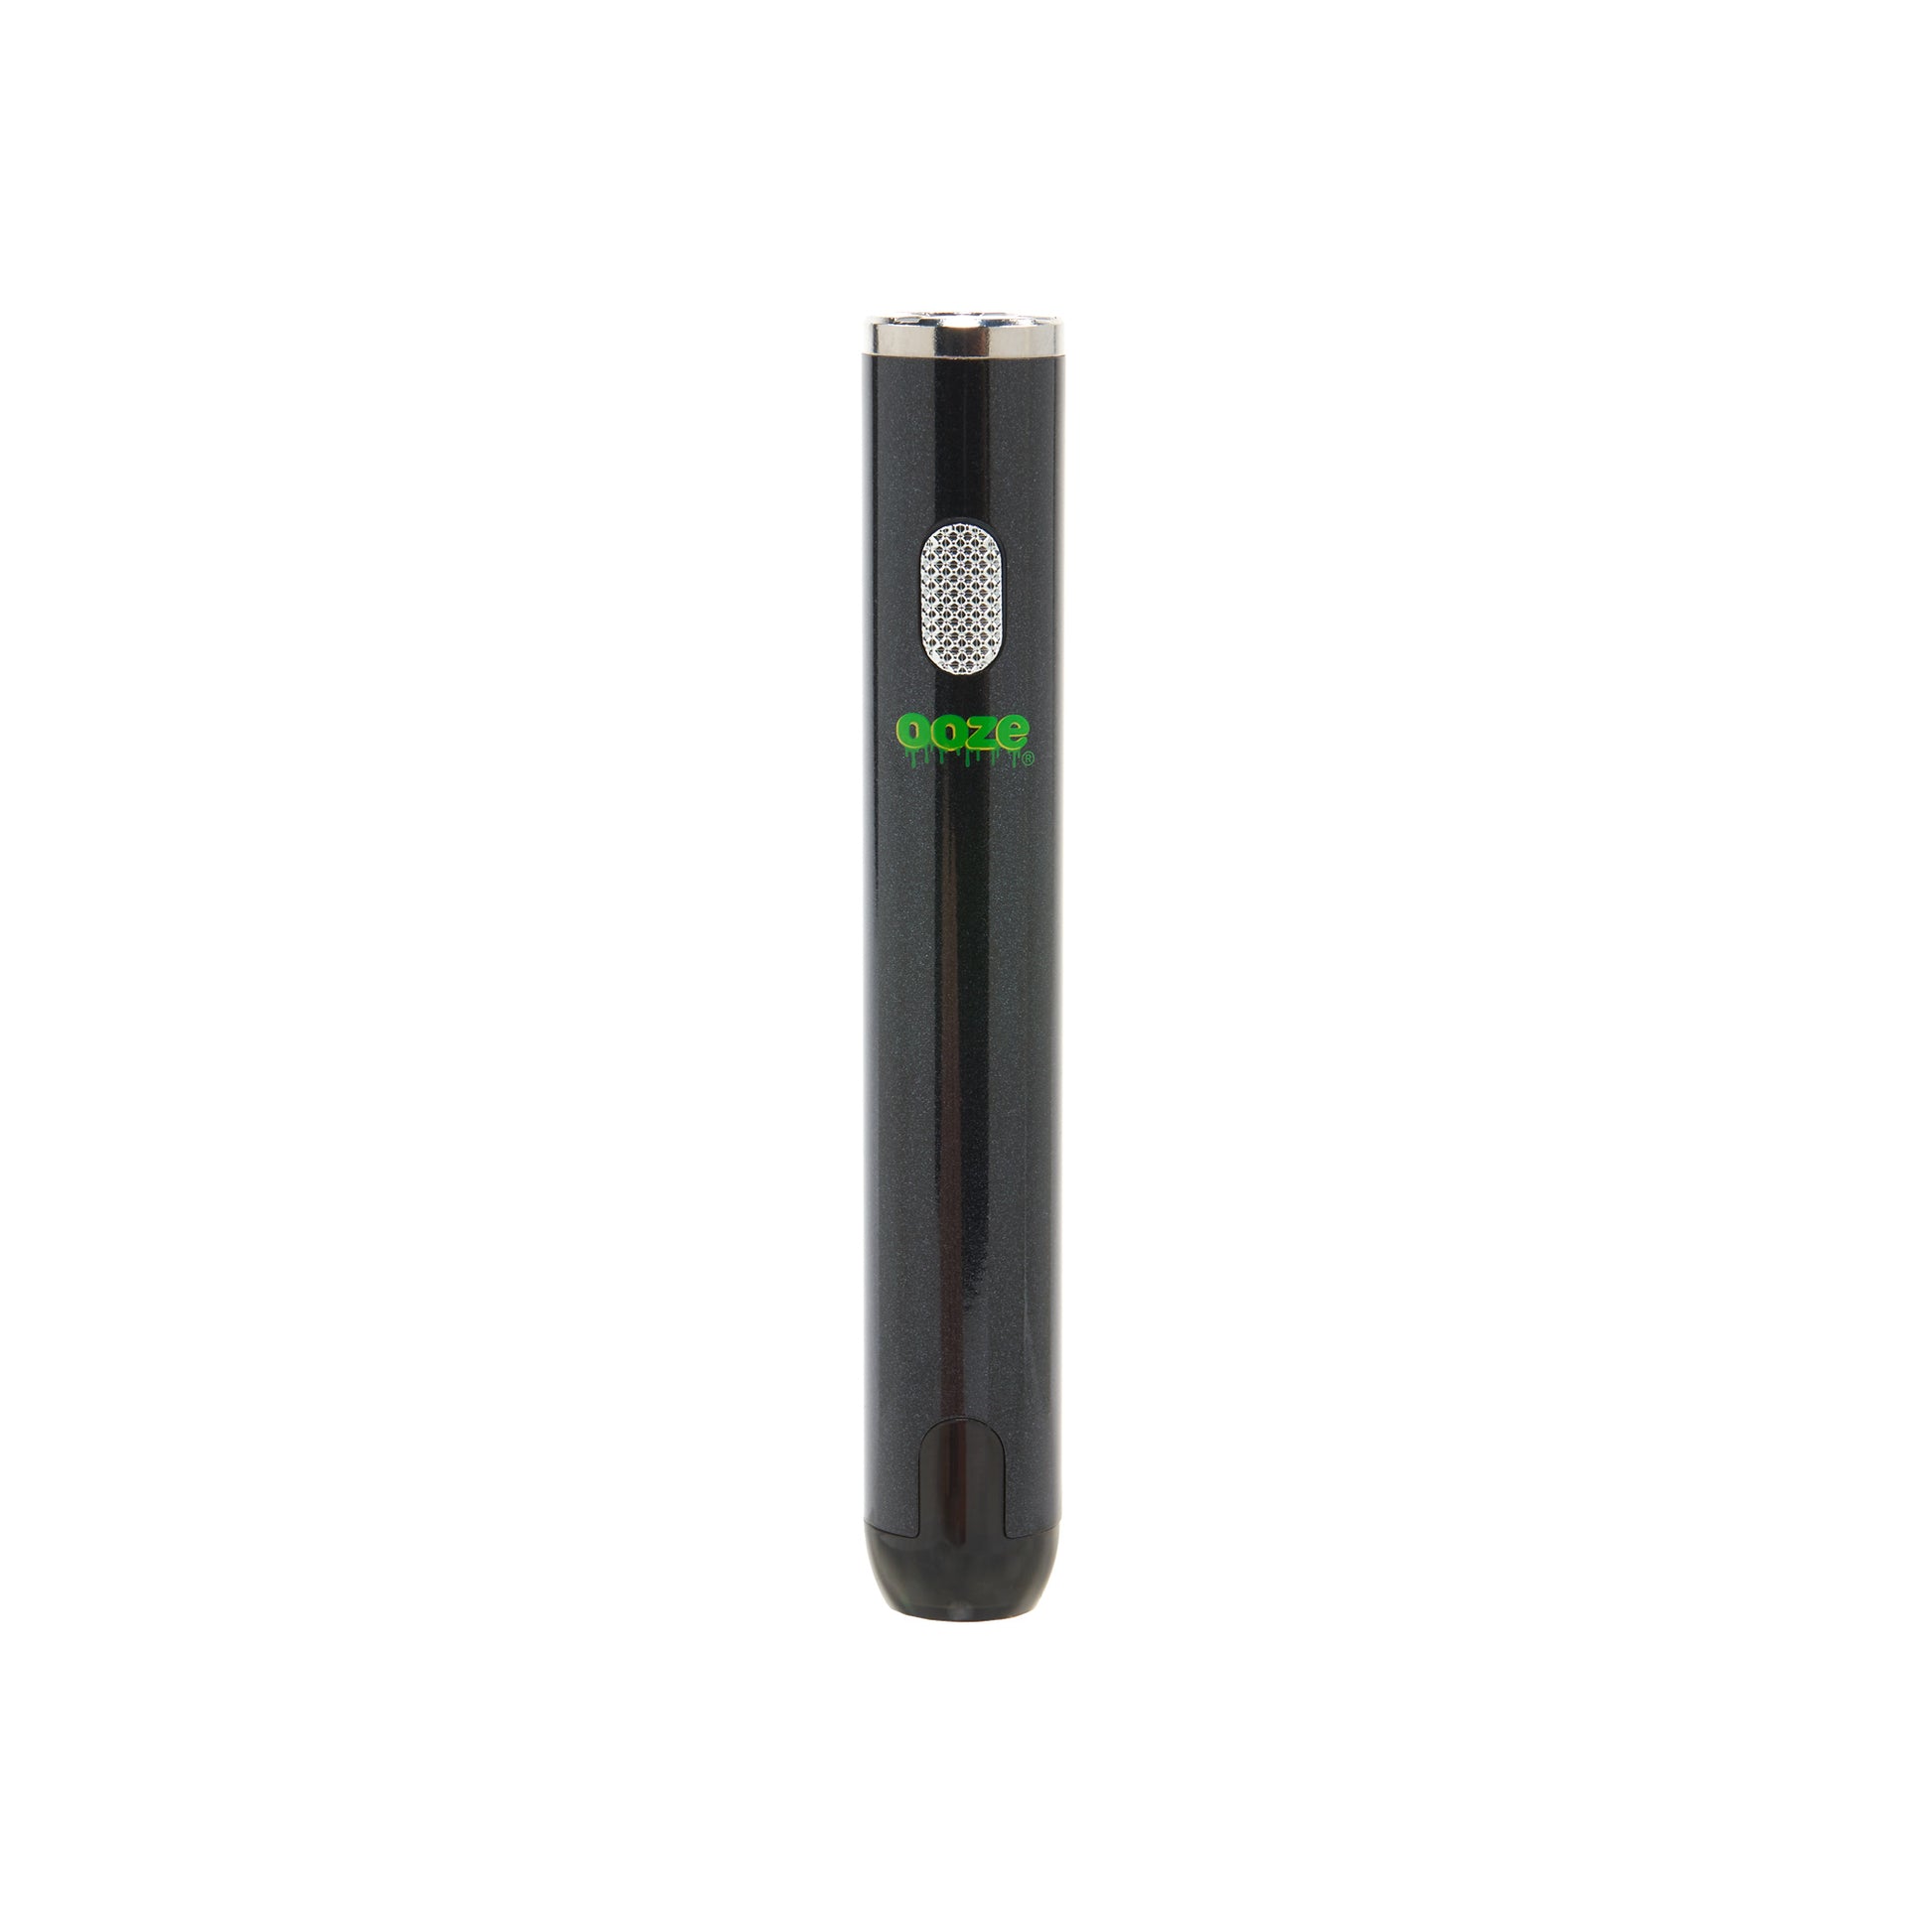 The black Ooze Smart Battery is upright and turned off without the charger